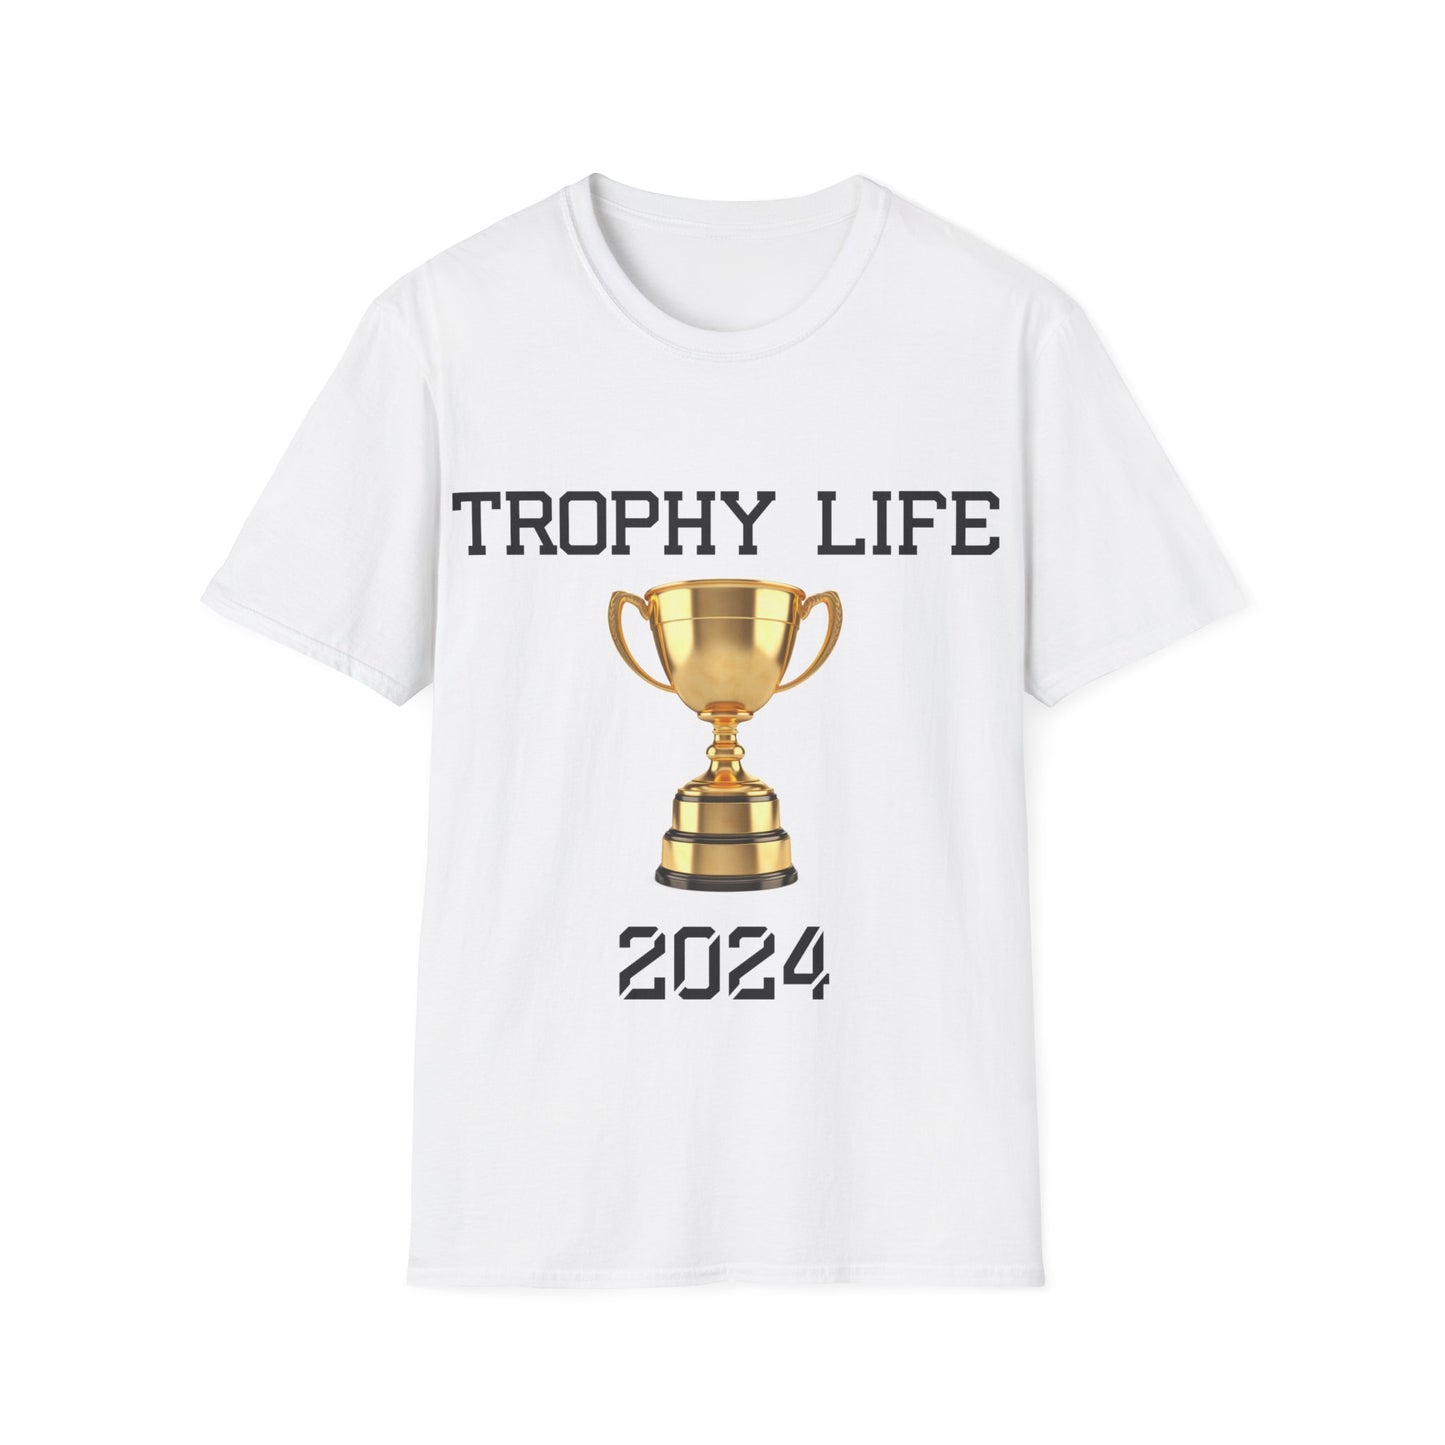 Trophy Life - Hurts Shirts Collection